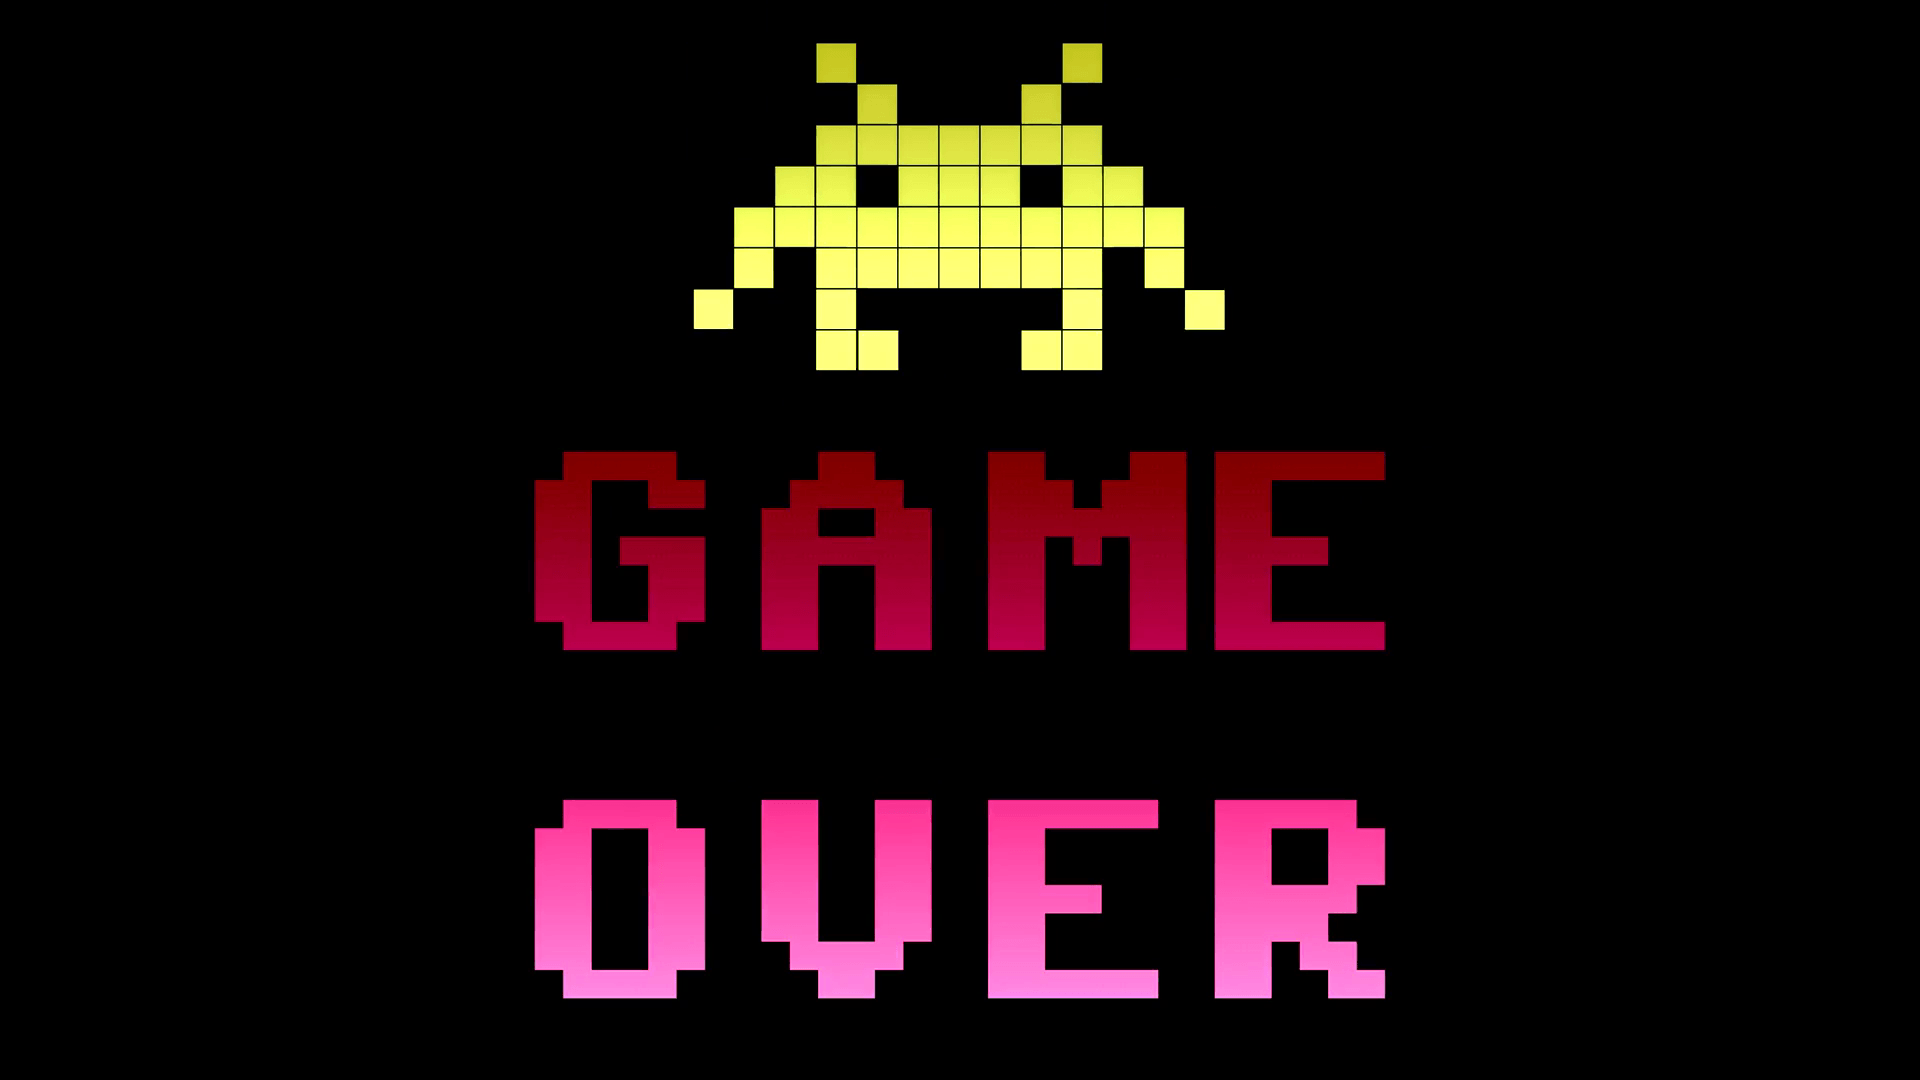 Game Over Alien 8 Bit 4k A Game Over Screen With An Evil